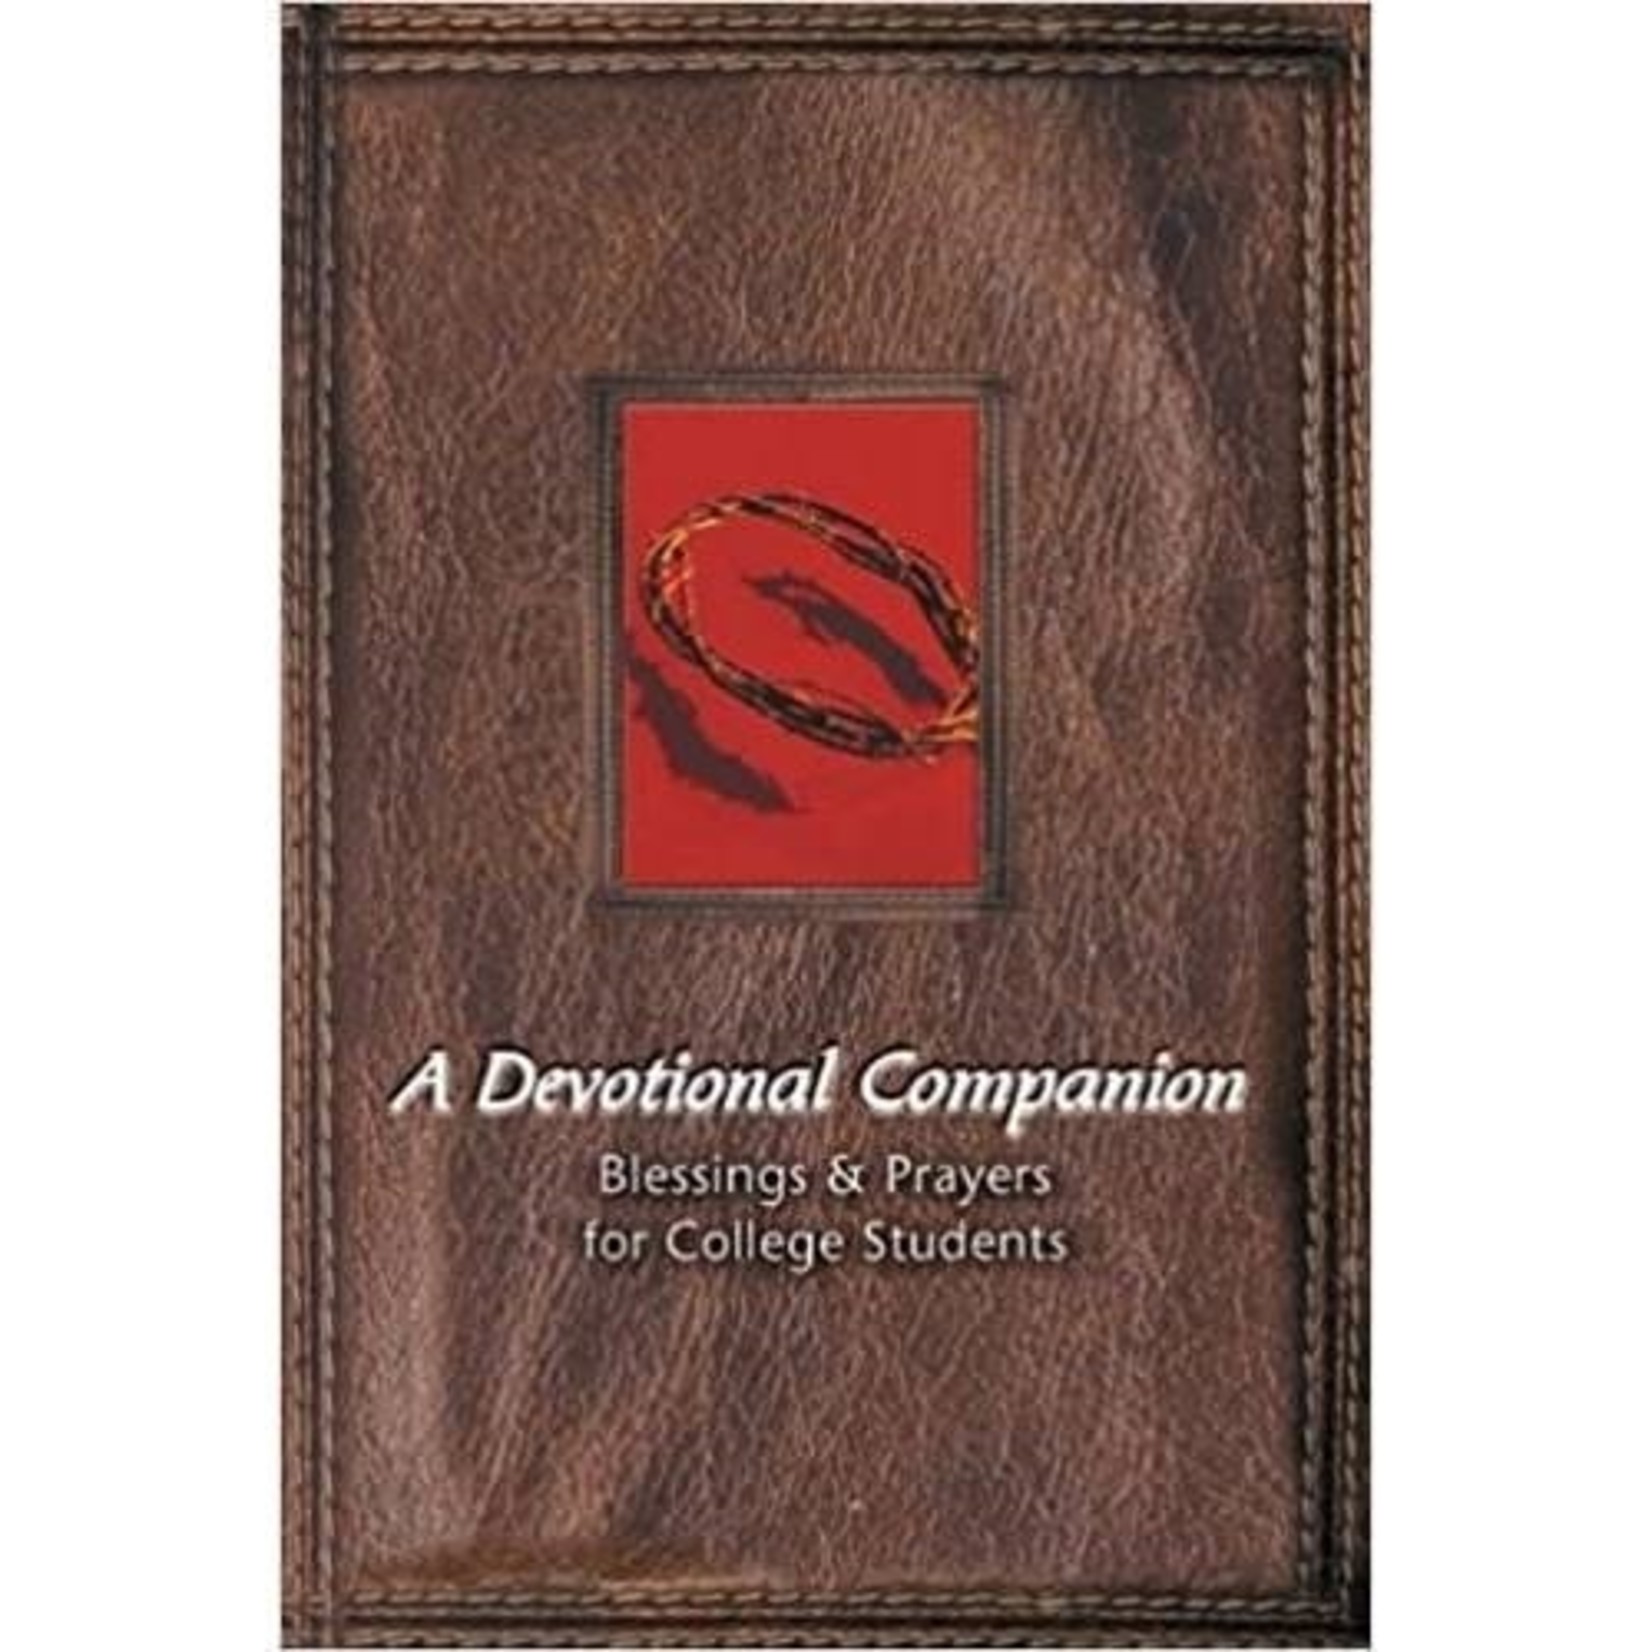 A Devotional Companion - Blessings and Prayers for College Students